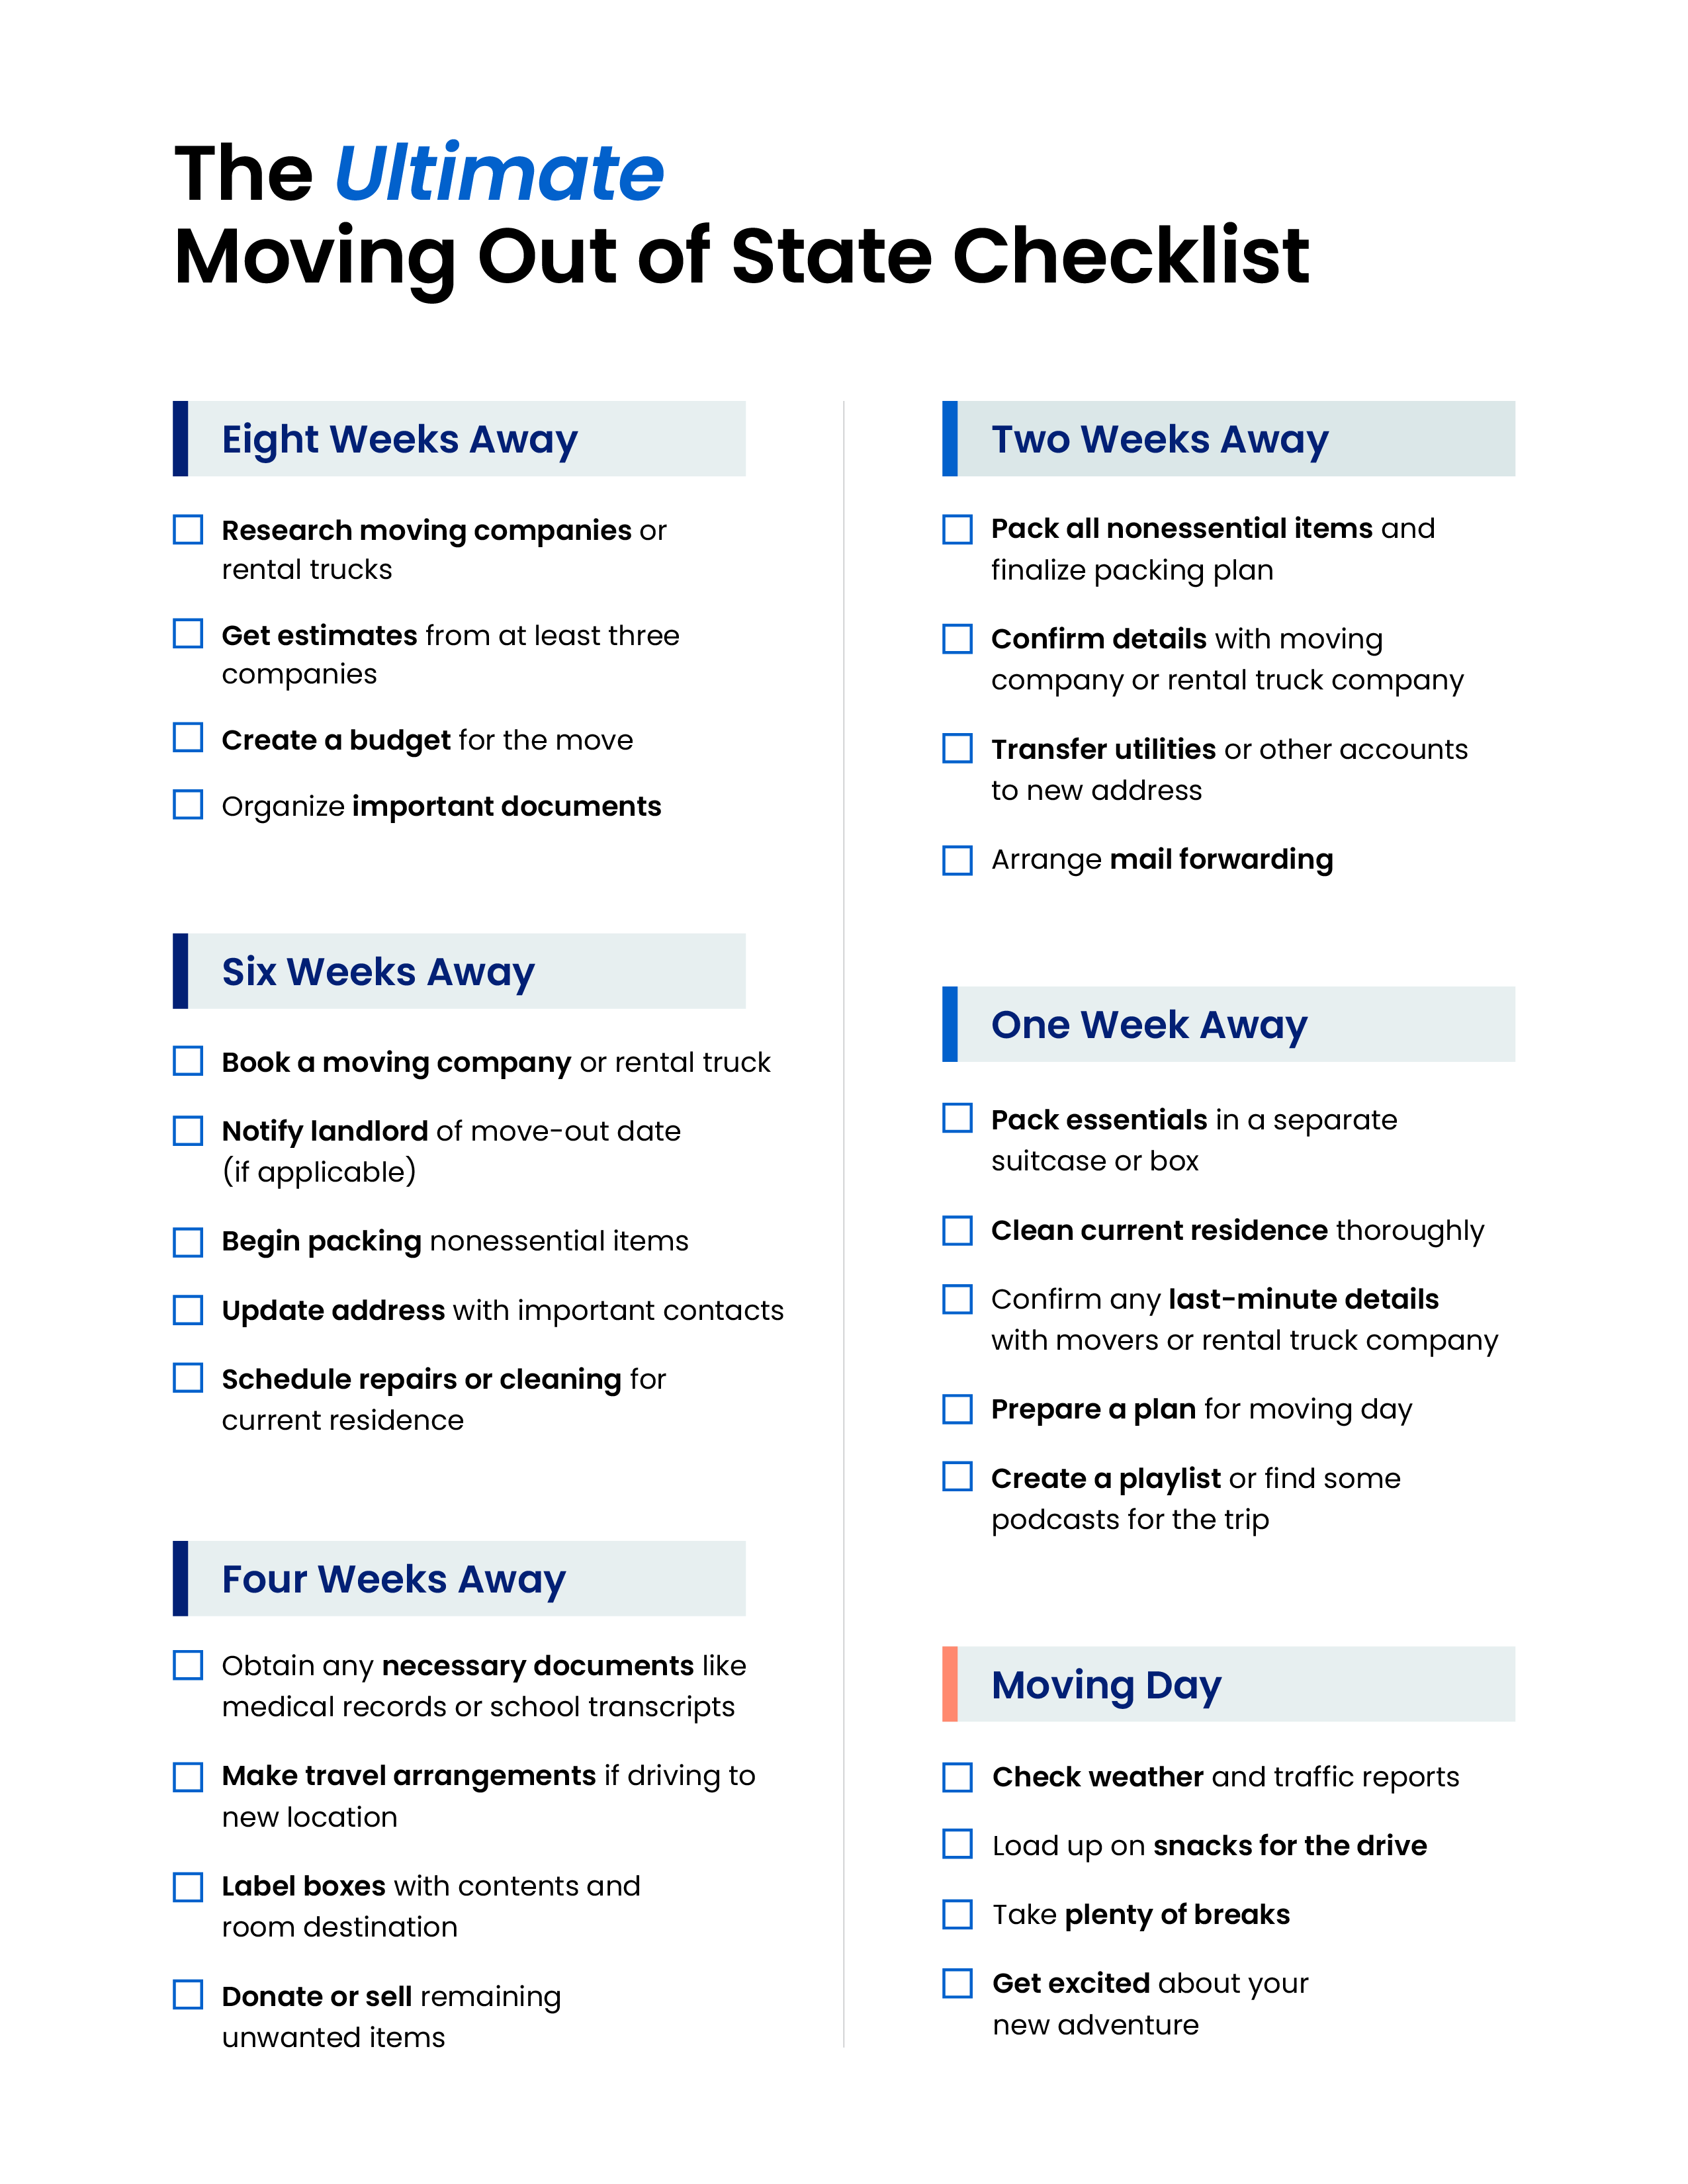 Download the moving out of state checklist.